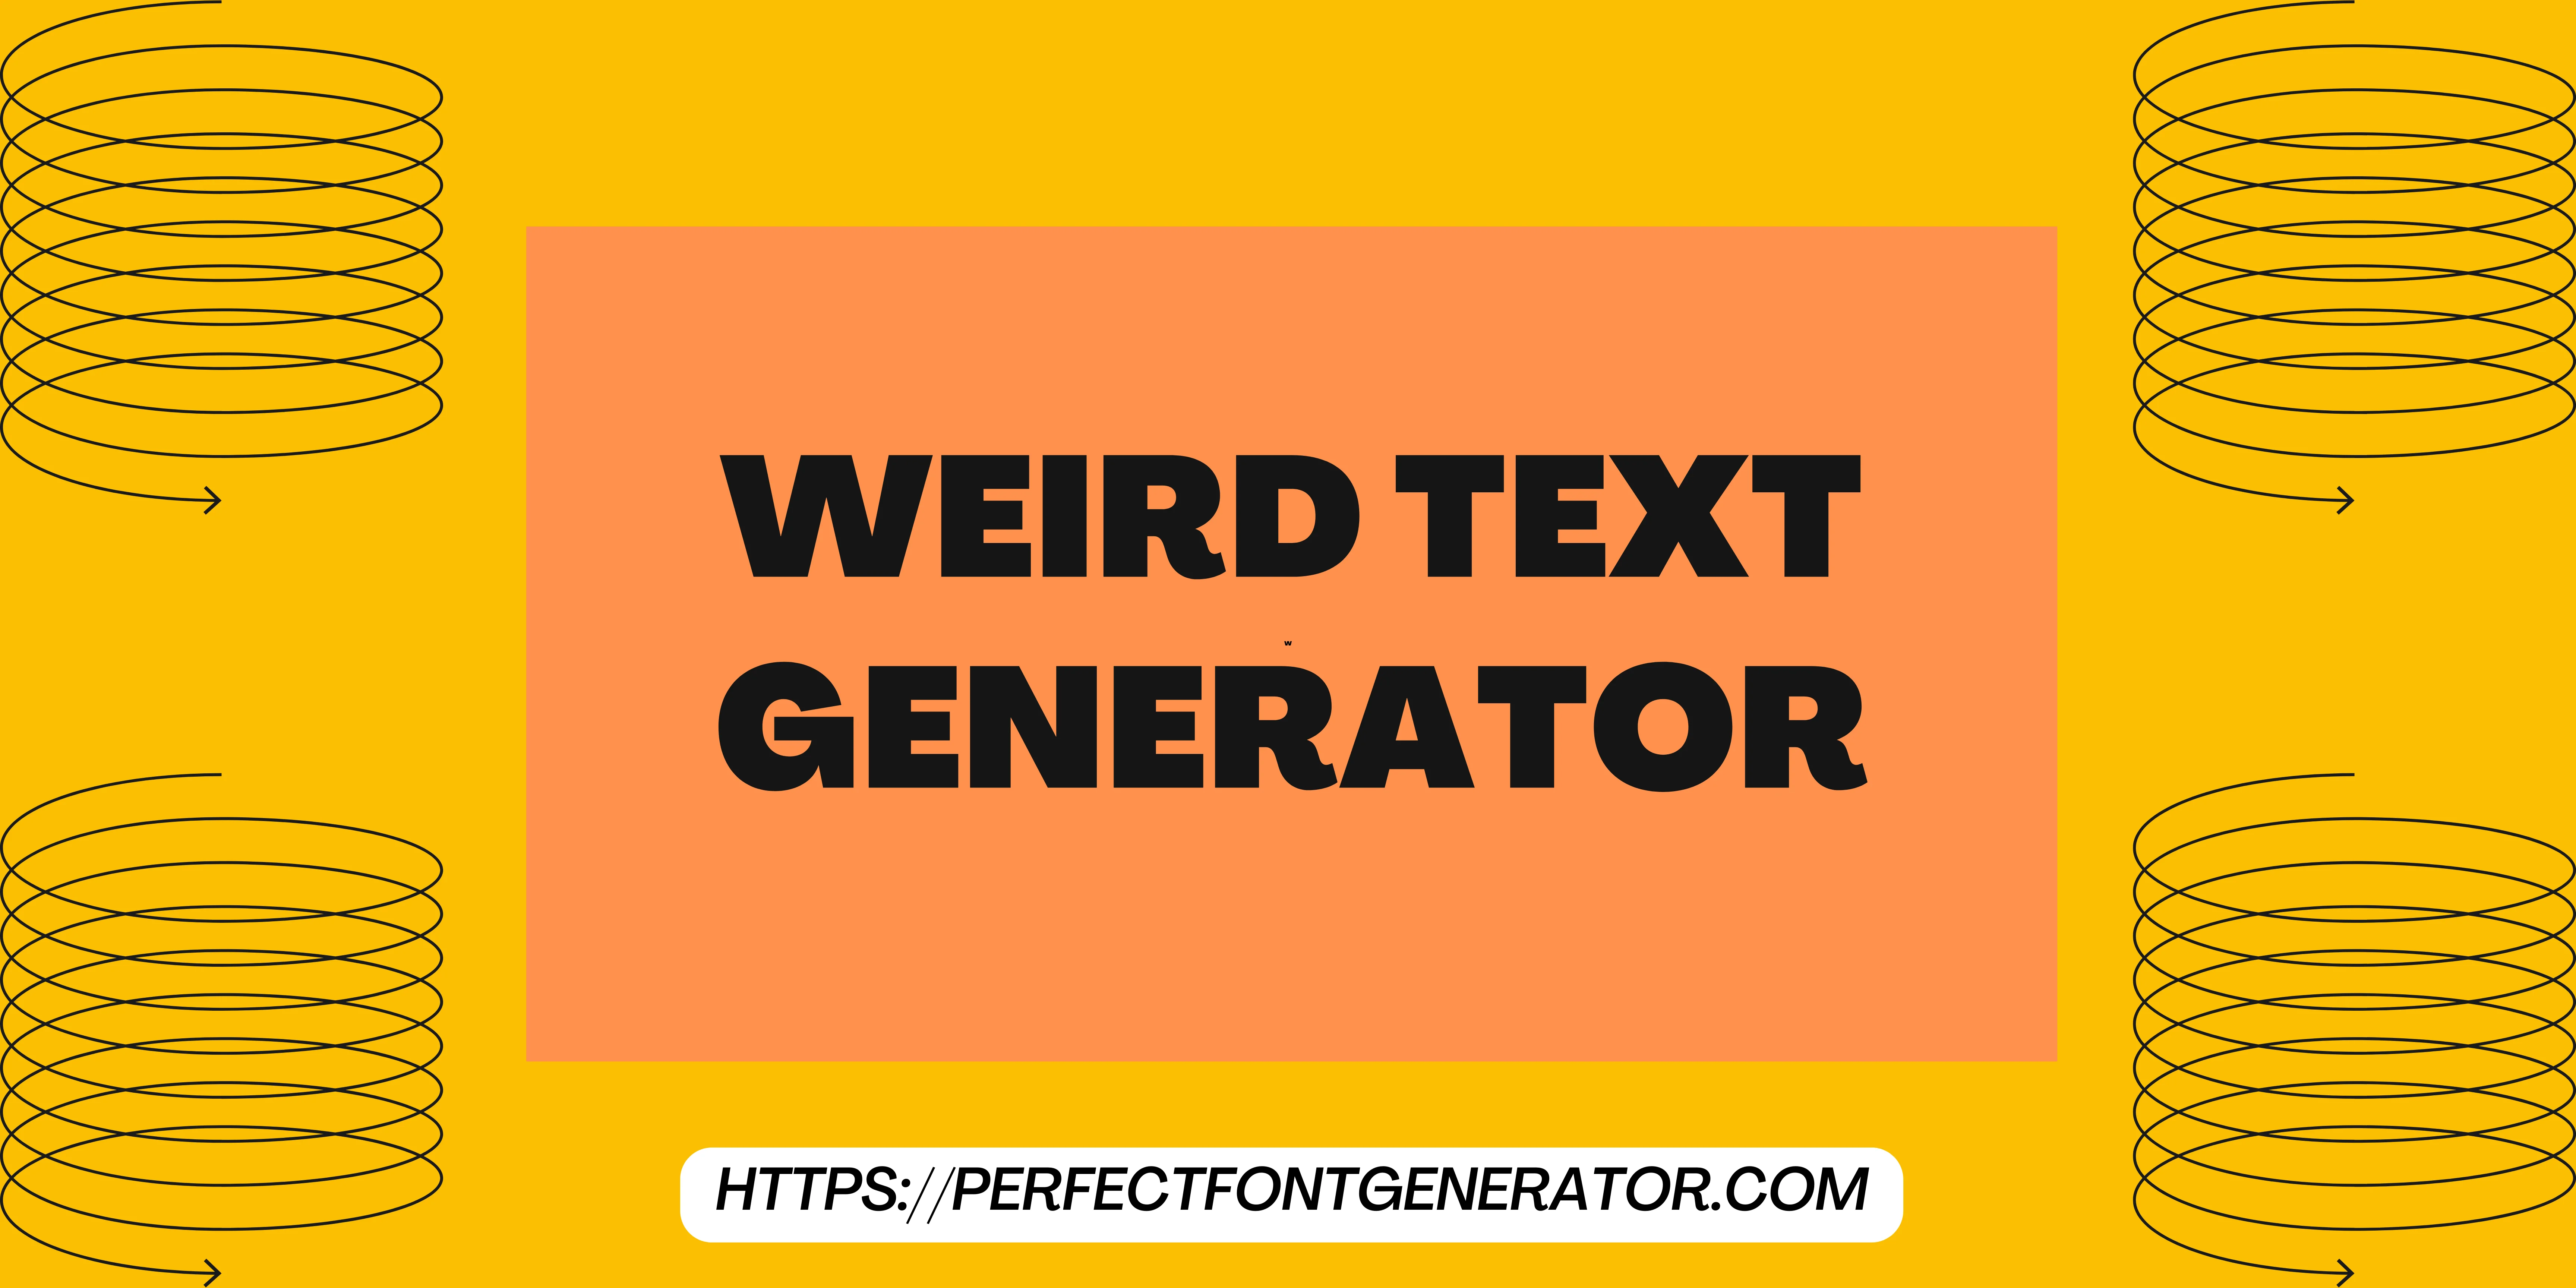 weired text generator